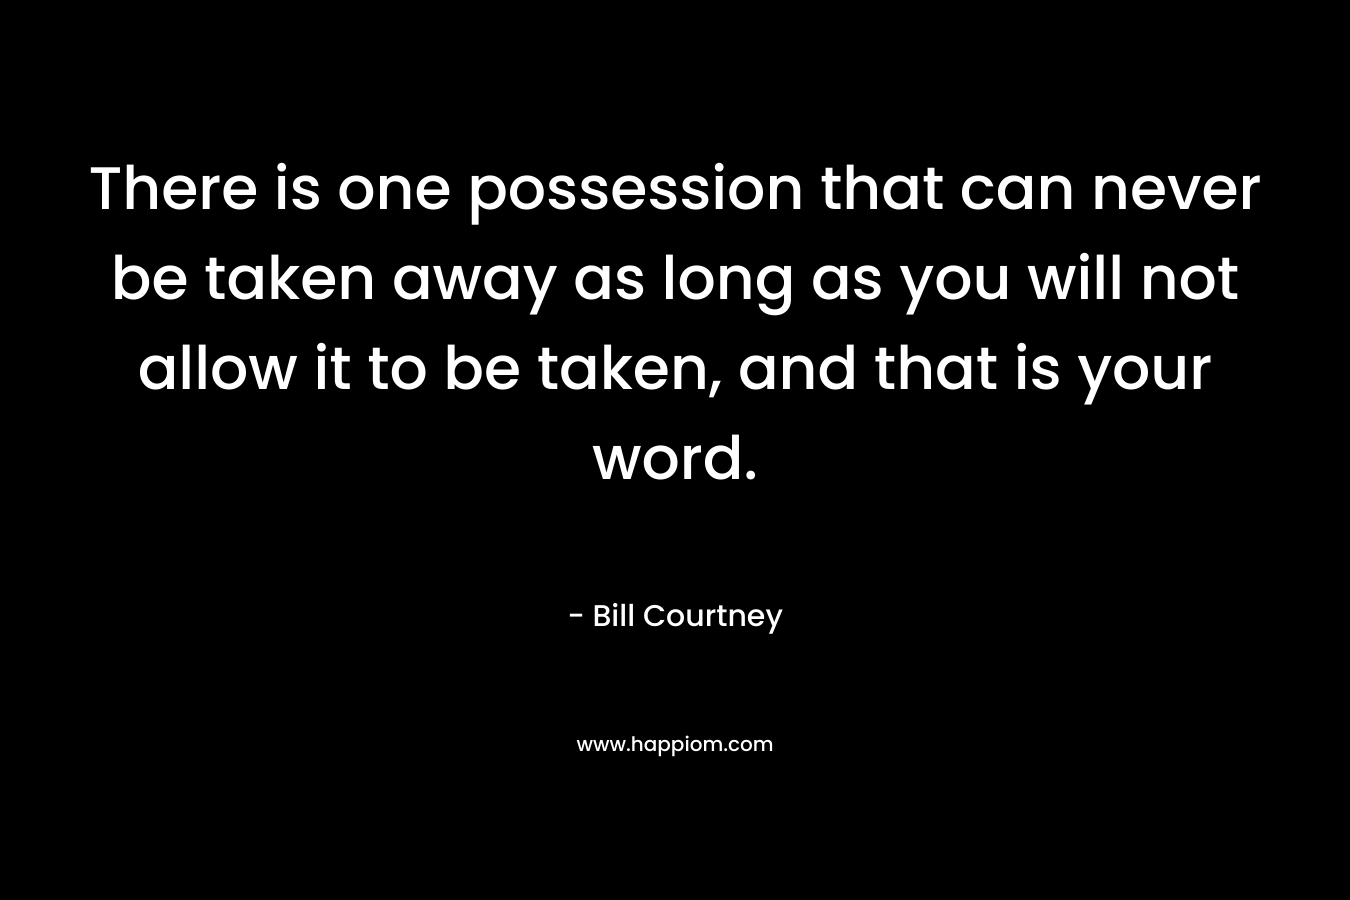 There is one possession that can never be taken away as long as you will not allow it to be taken, and that is your word.